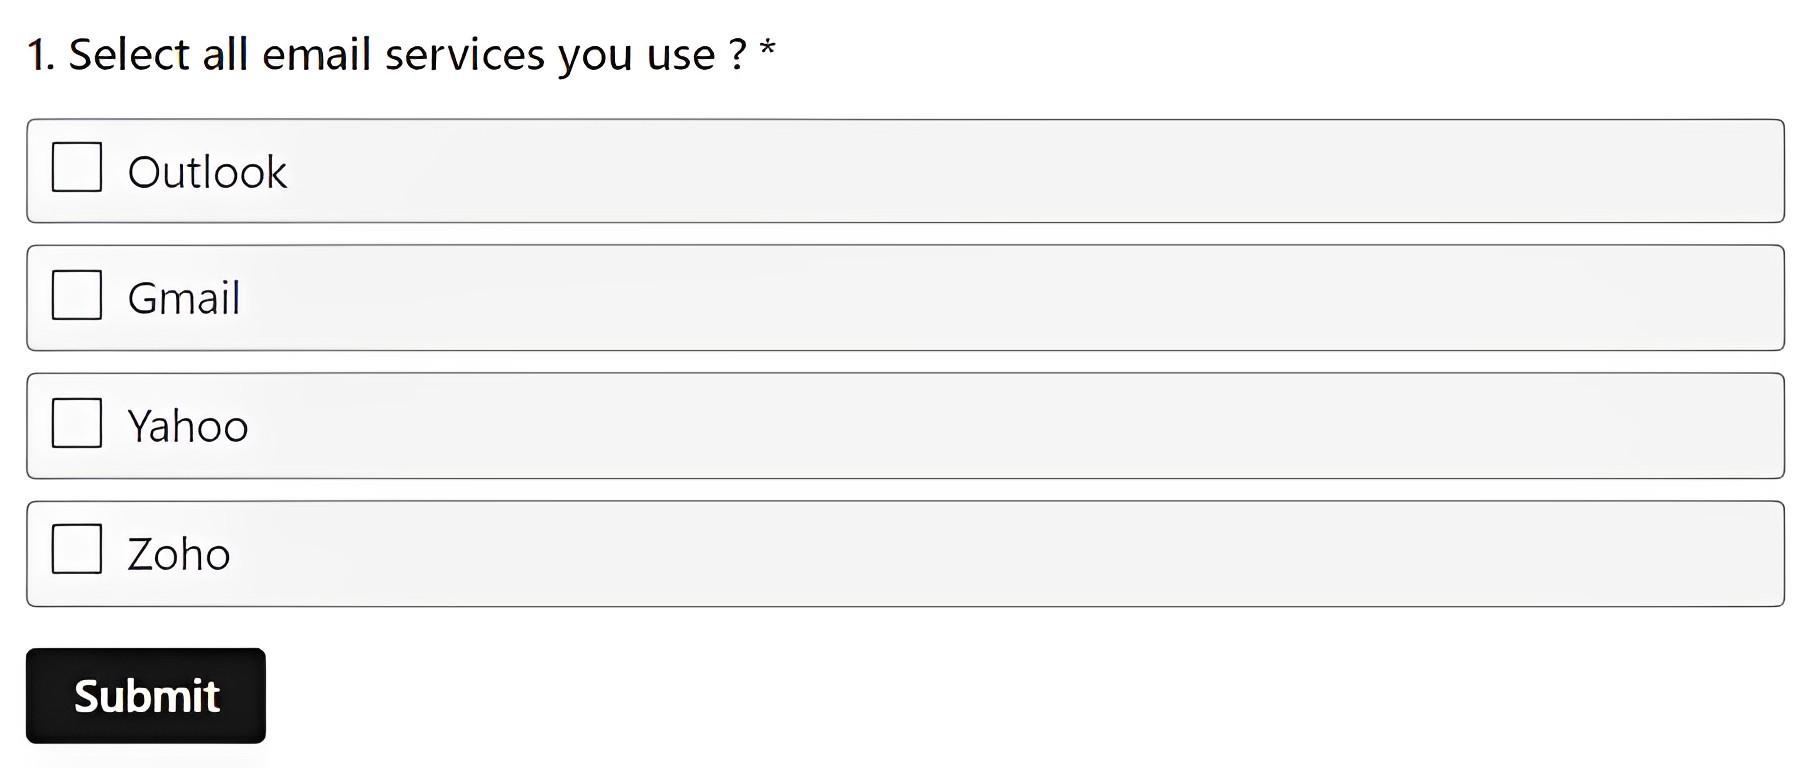 How to Create a Full Name Question in Zoho Survey